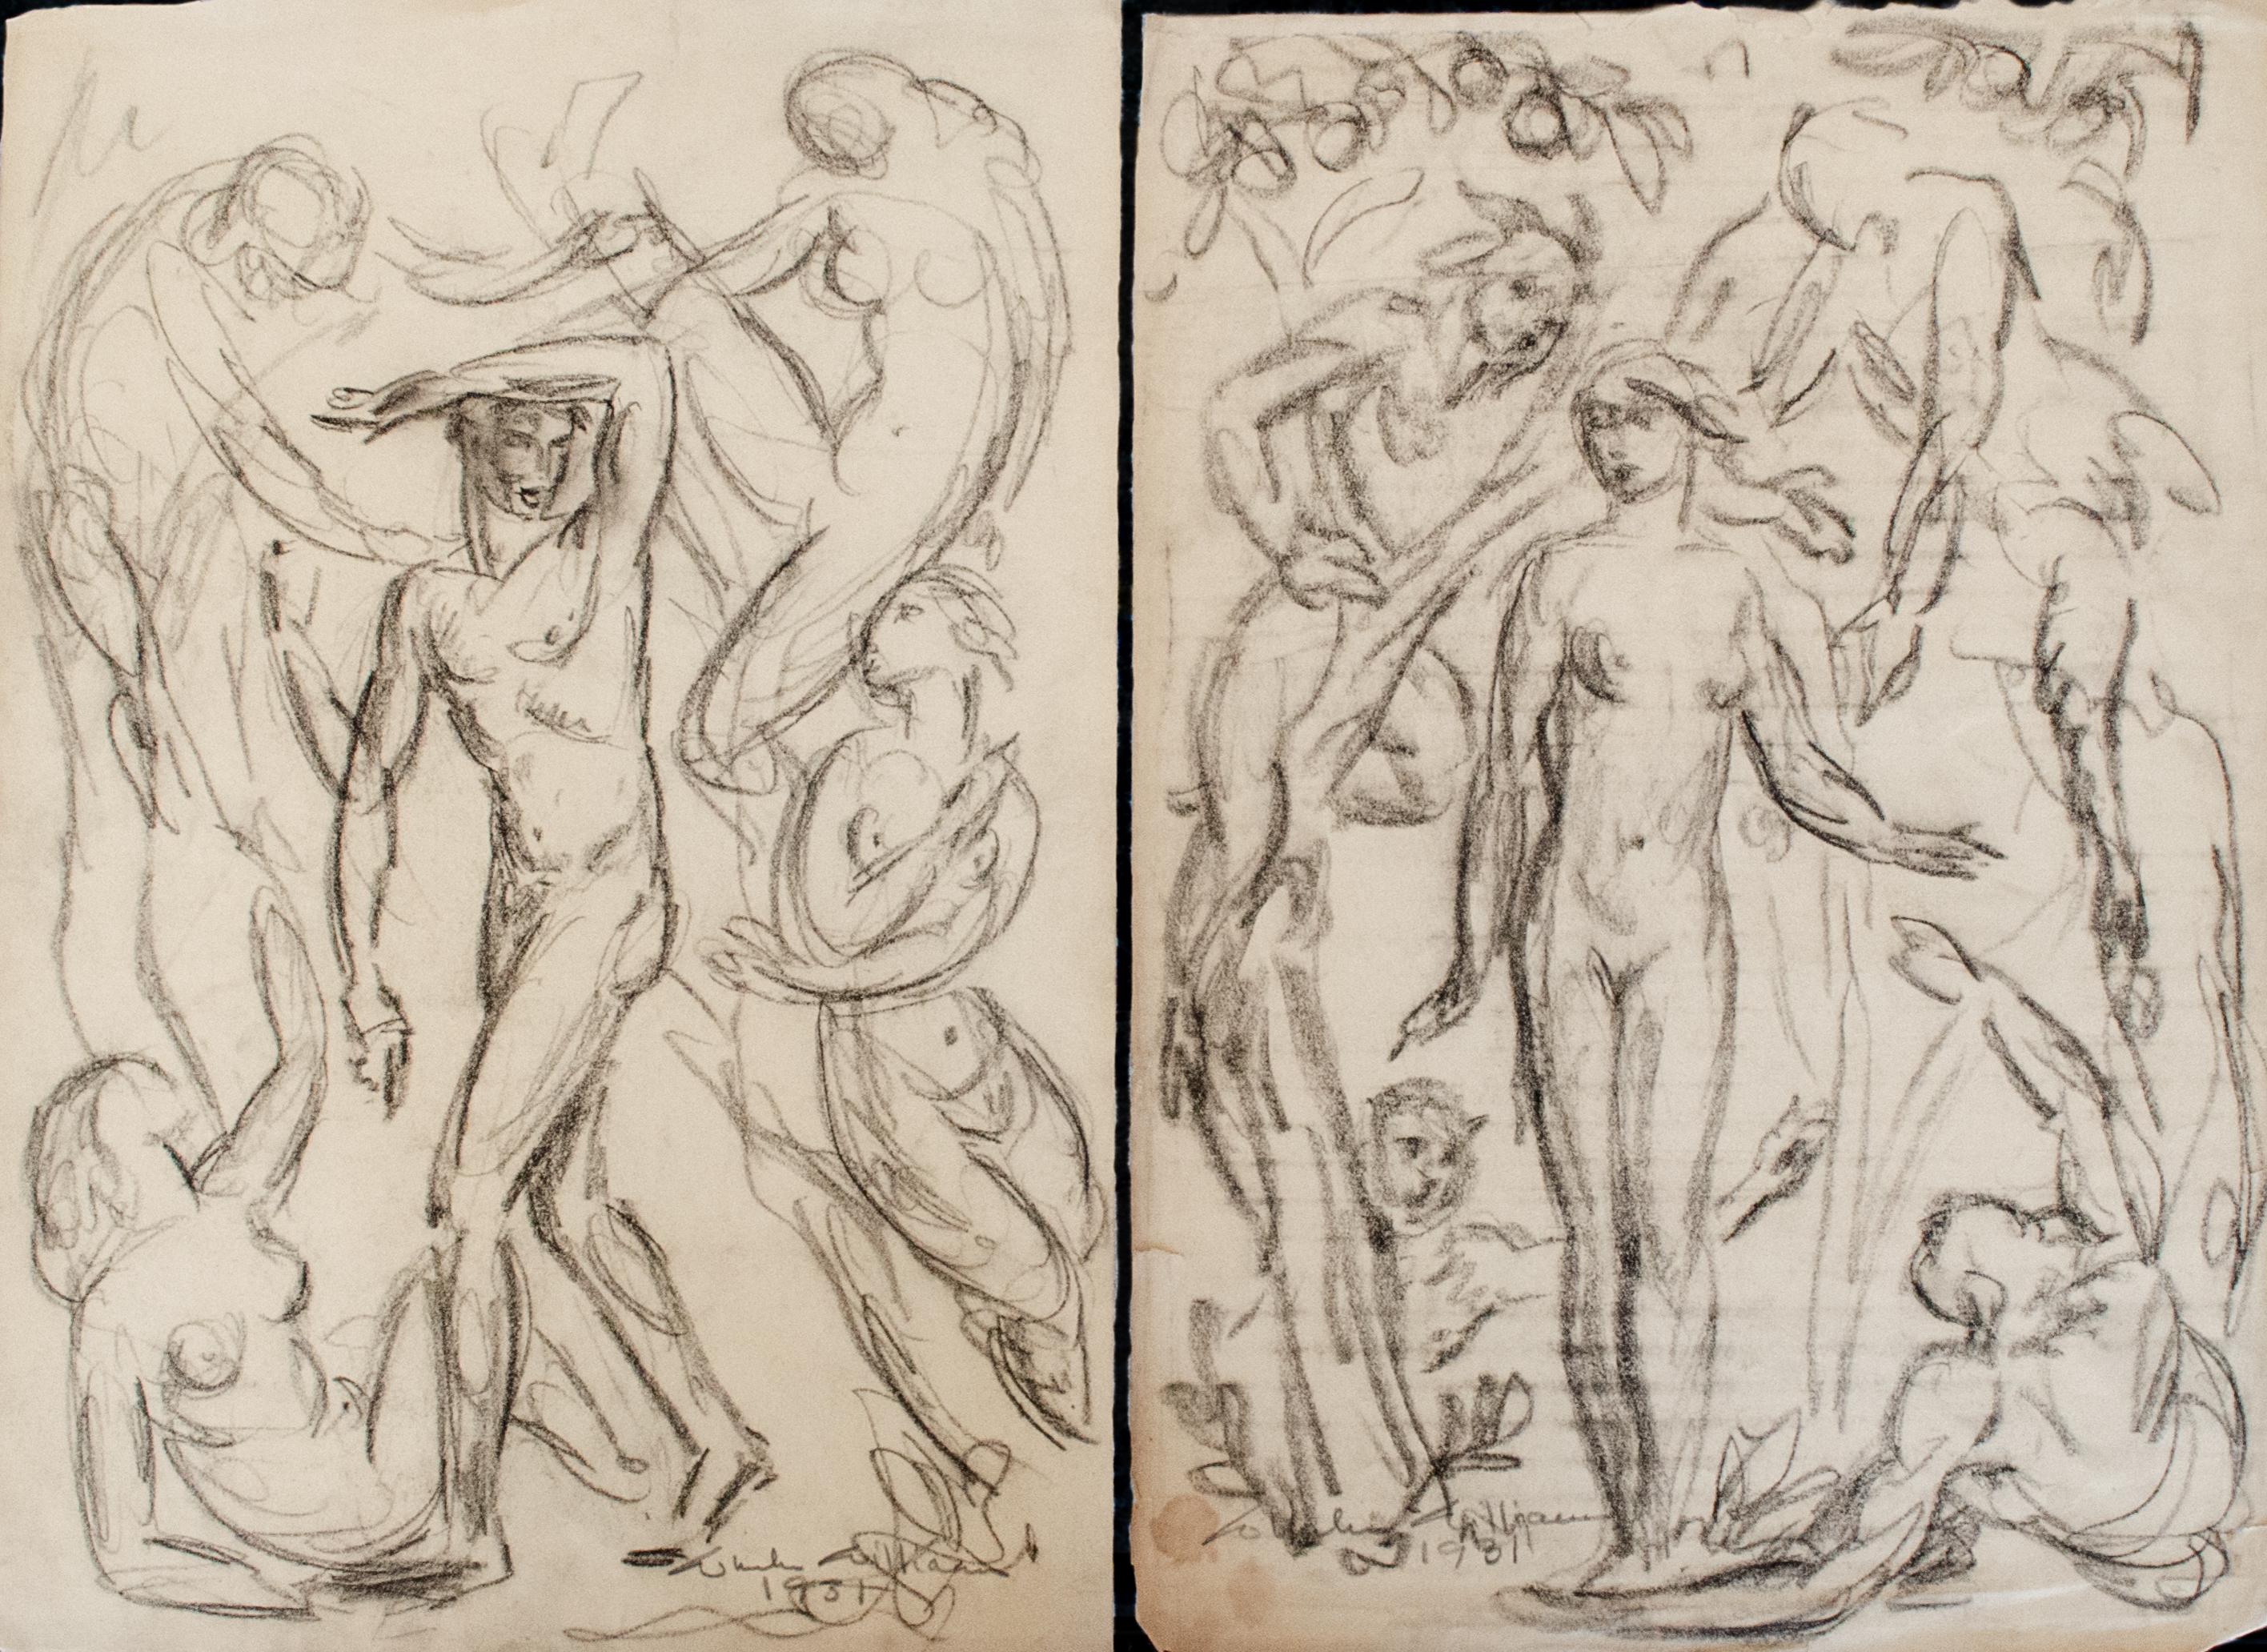 Wheeler Williams (American, 1897-1972)
Untitled Study, 1931
Pencil on paper
8 3/4 x 11 3/4 in. 
Each signed: Wheeler Williams, 1931

A native of Chicago, Wheeler Williams is known for his allegorical, narrative work including "Tablets to Pioneers"